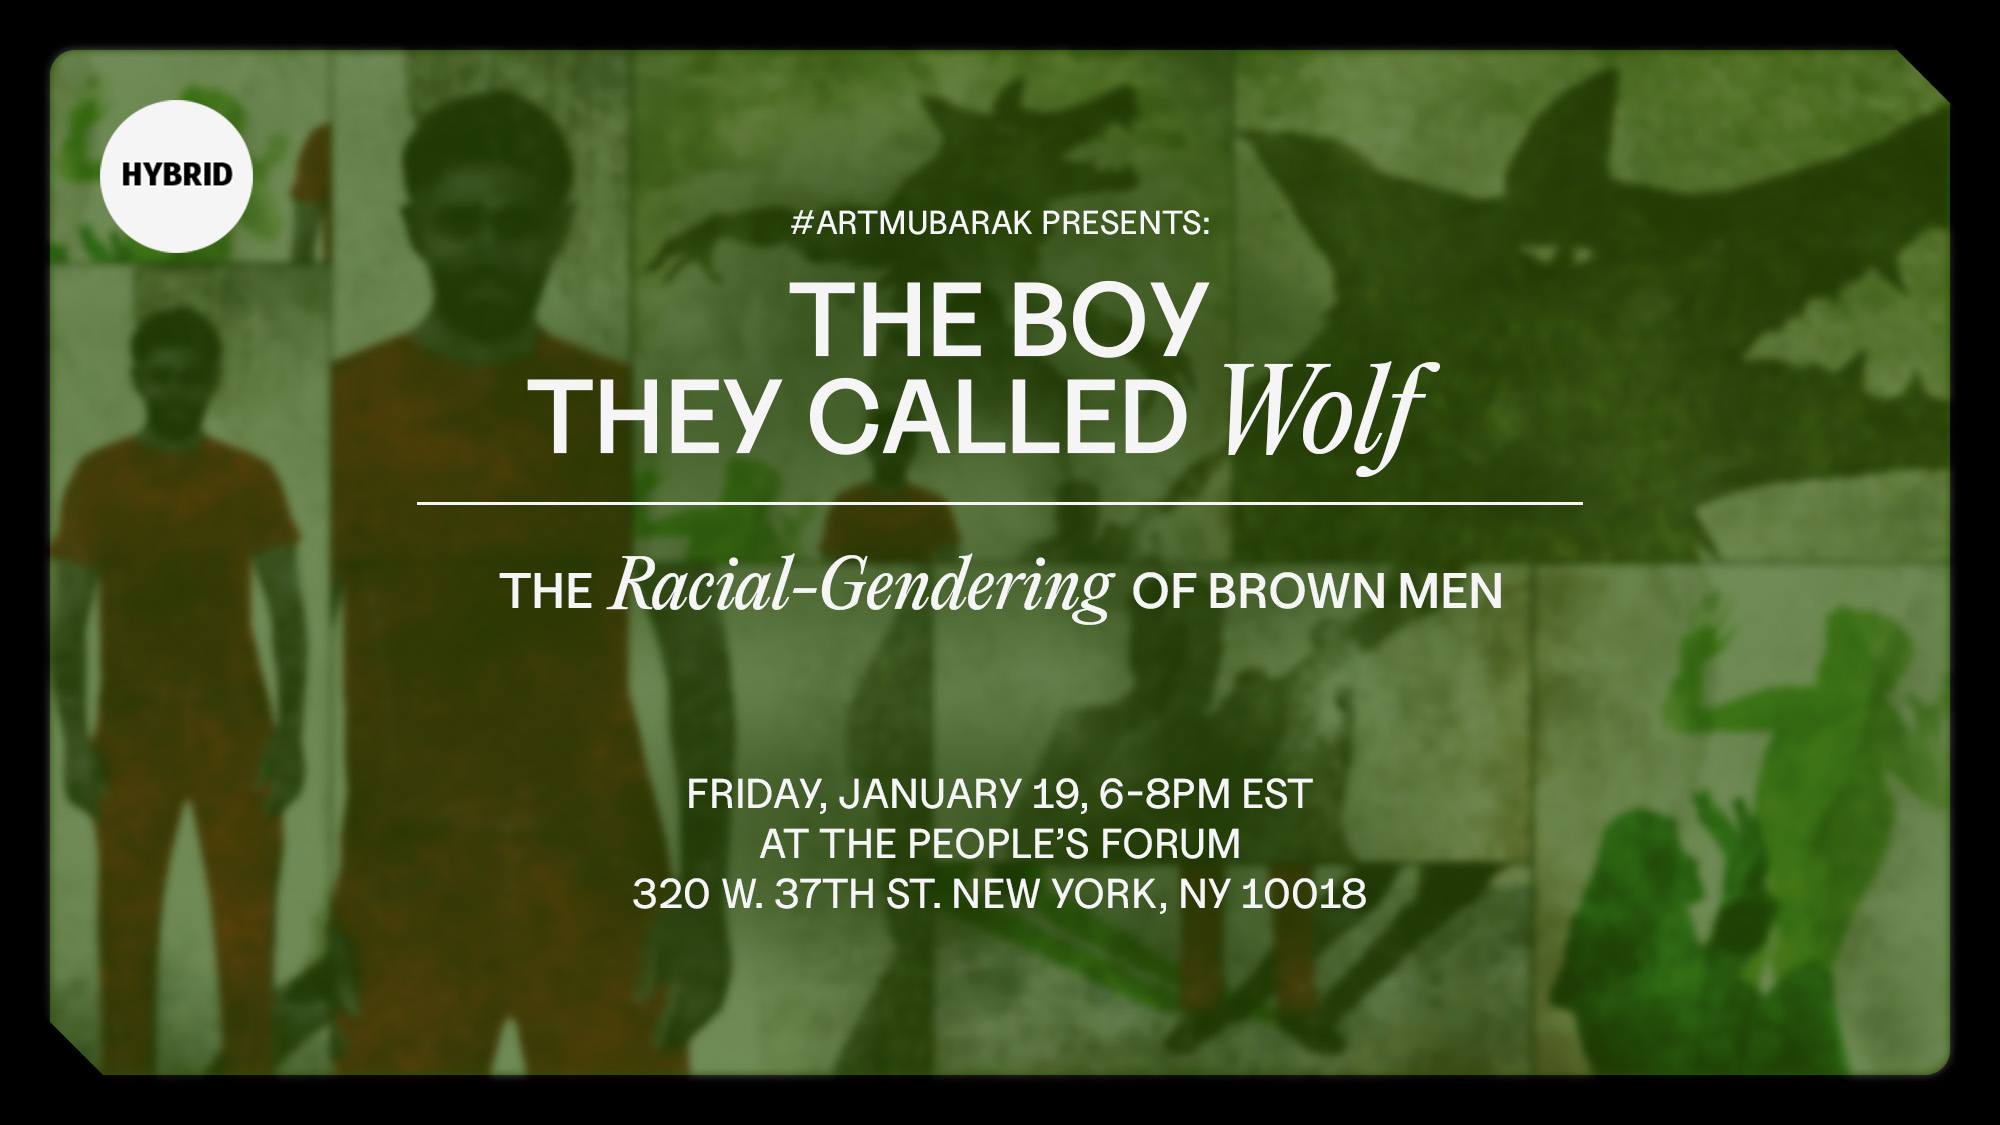 A green banner with the text: "ArtMubarak presents The Boy They Called Wolf: The Racial-Gendering of Brown Men" January 19, 6-8PM EST at The People's Forum